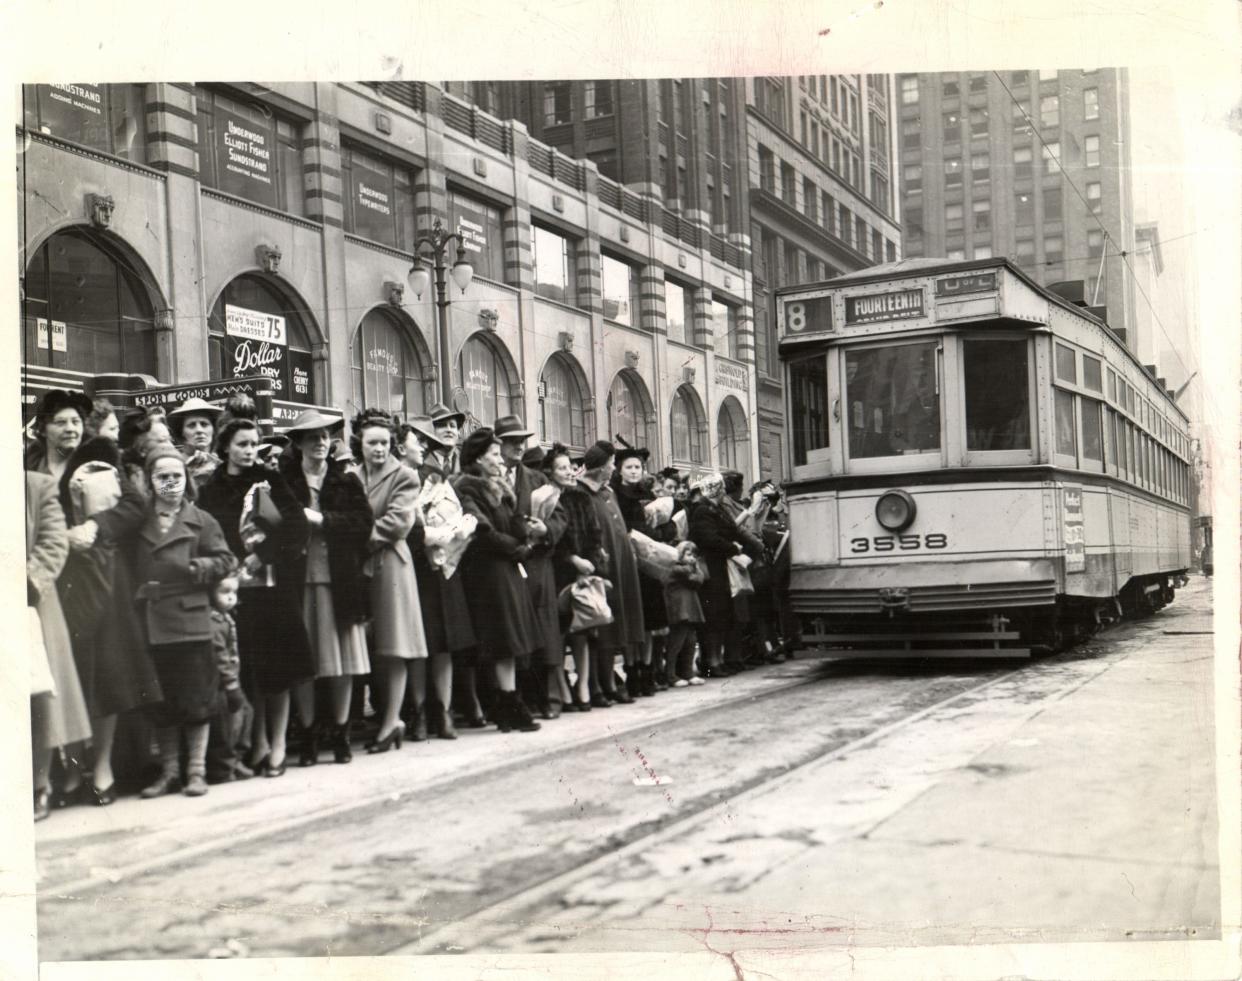 The heyday of the Detroit street car in 1942. Several years later, a 1.6 mile downturn subway was proposed but Mayor Eugene Antwerp didn't support it.